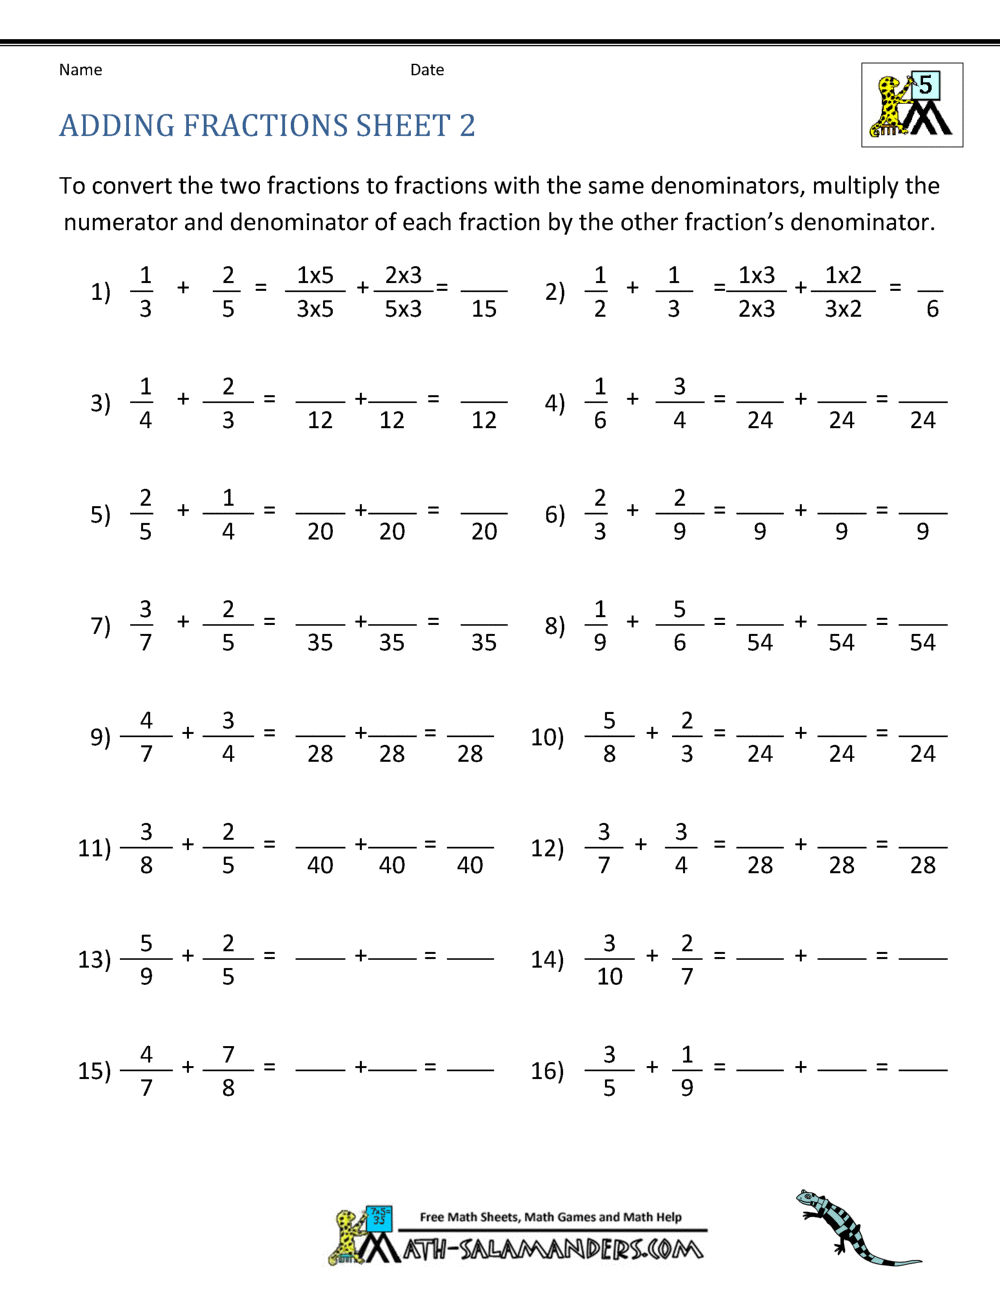 problems solving in adding fractions